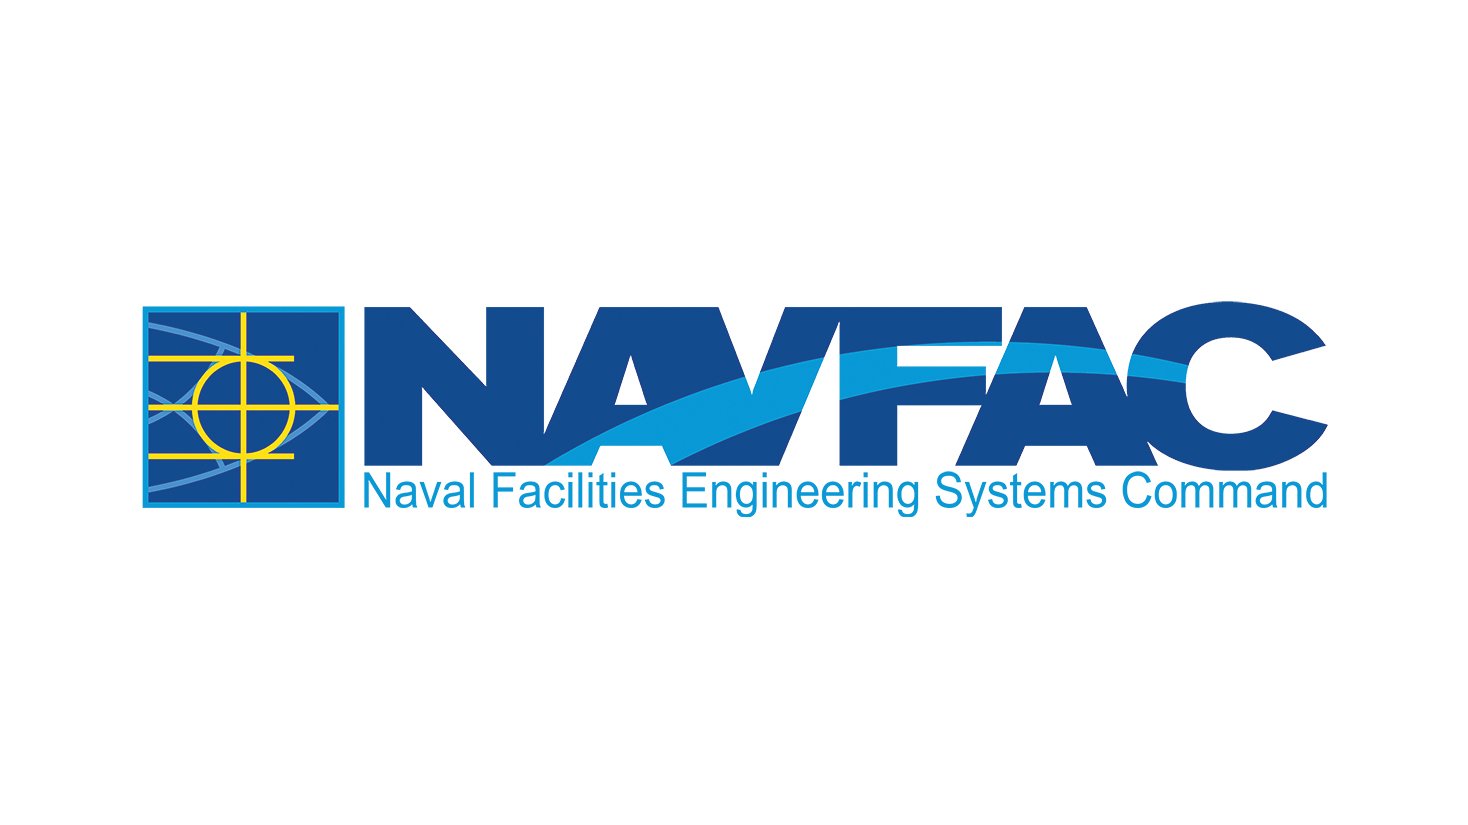 Beam Global Receives Multiple Orders from the Naval Facilities Engineering Systems Command (NAVFAC) for EV ARC™ Sustainable EV Charging Infrastructure Systems